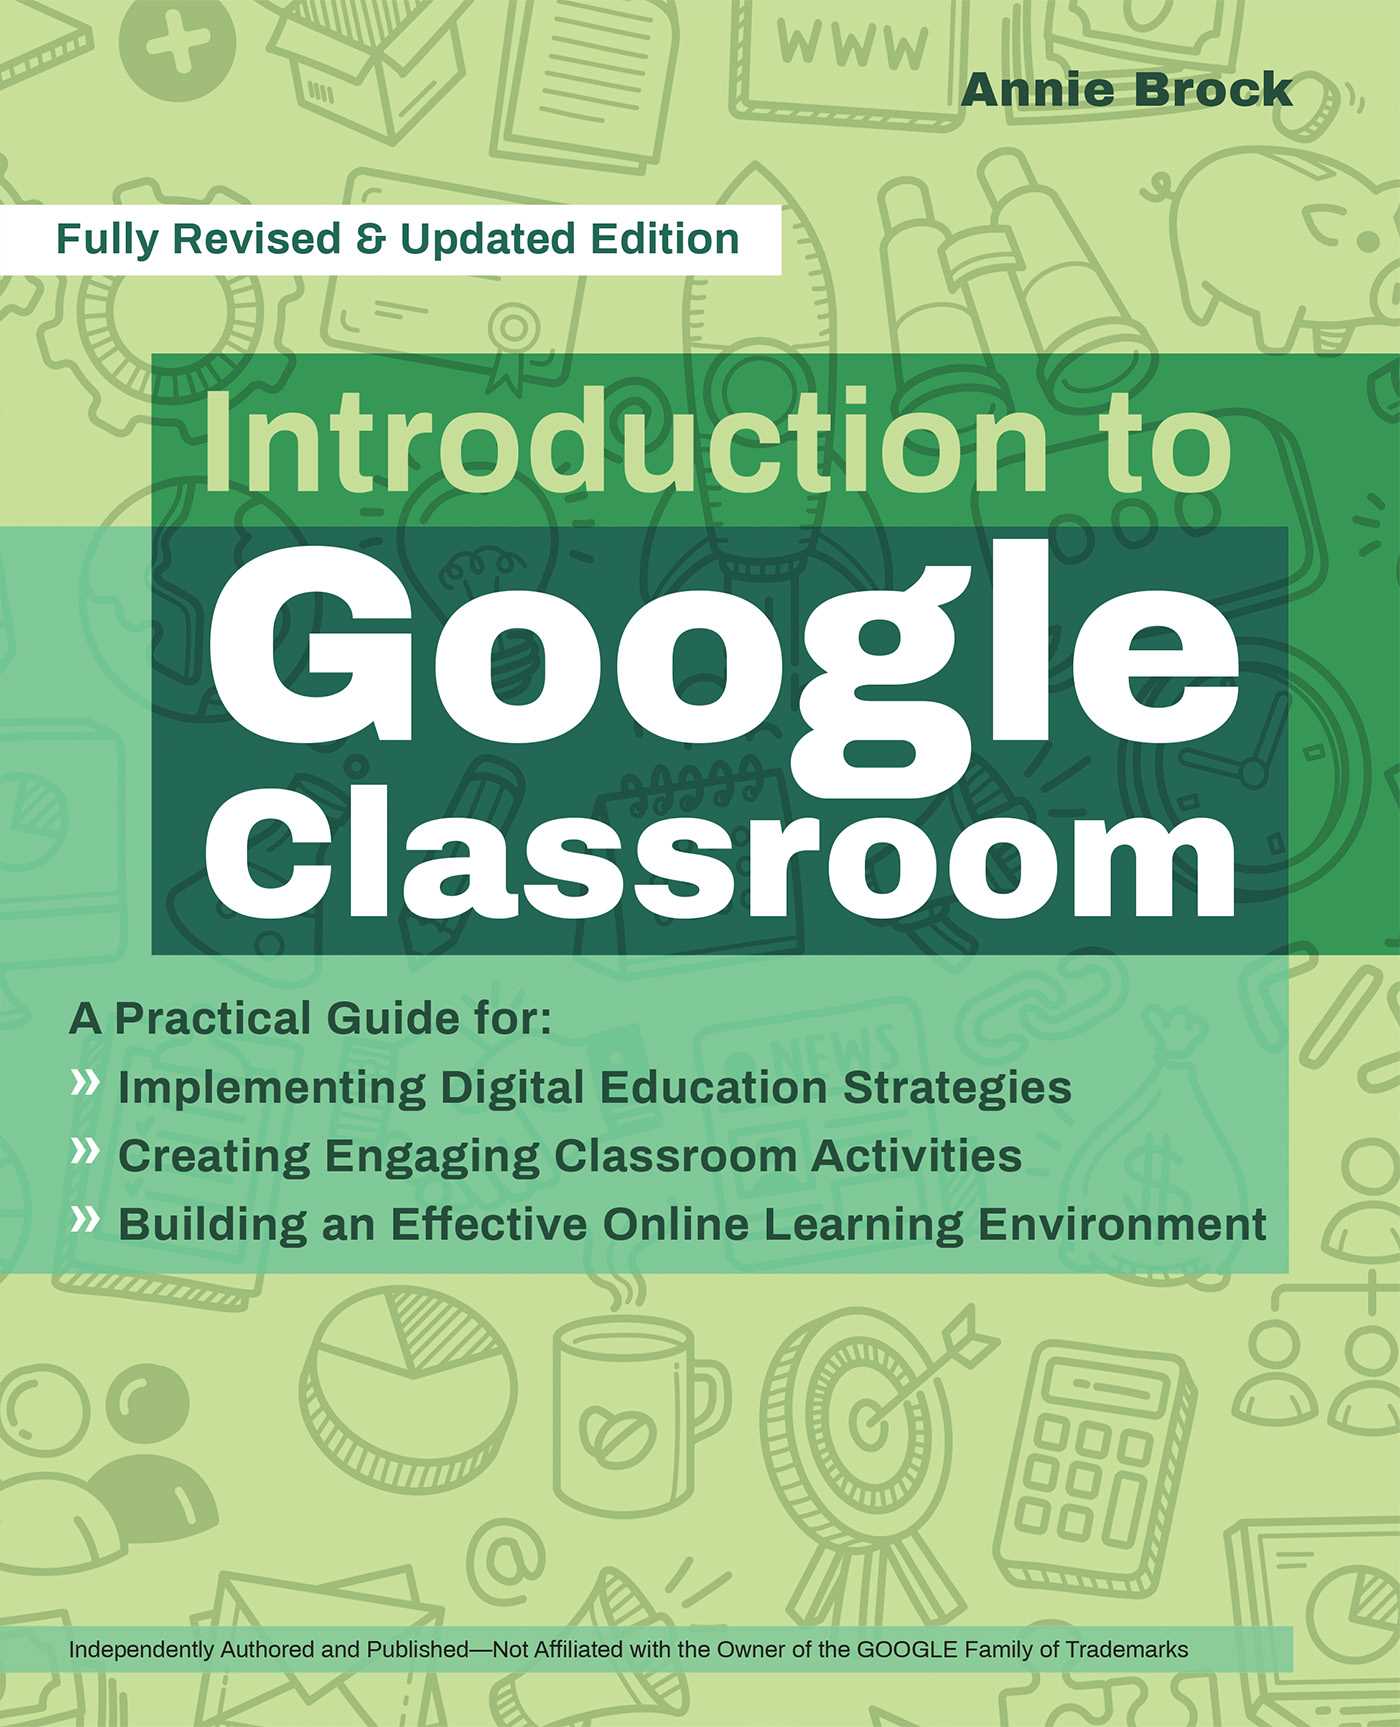 Introduction to Google Classroom : A Practical Guide for Implementing Digital Education Strategies, Creating Engaging Classroom Activities, and Building an Effective Online Learning Environment | Brock, Annie